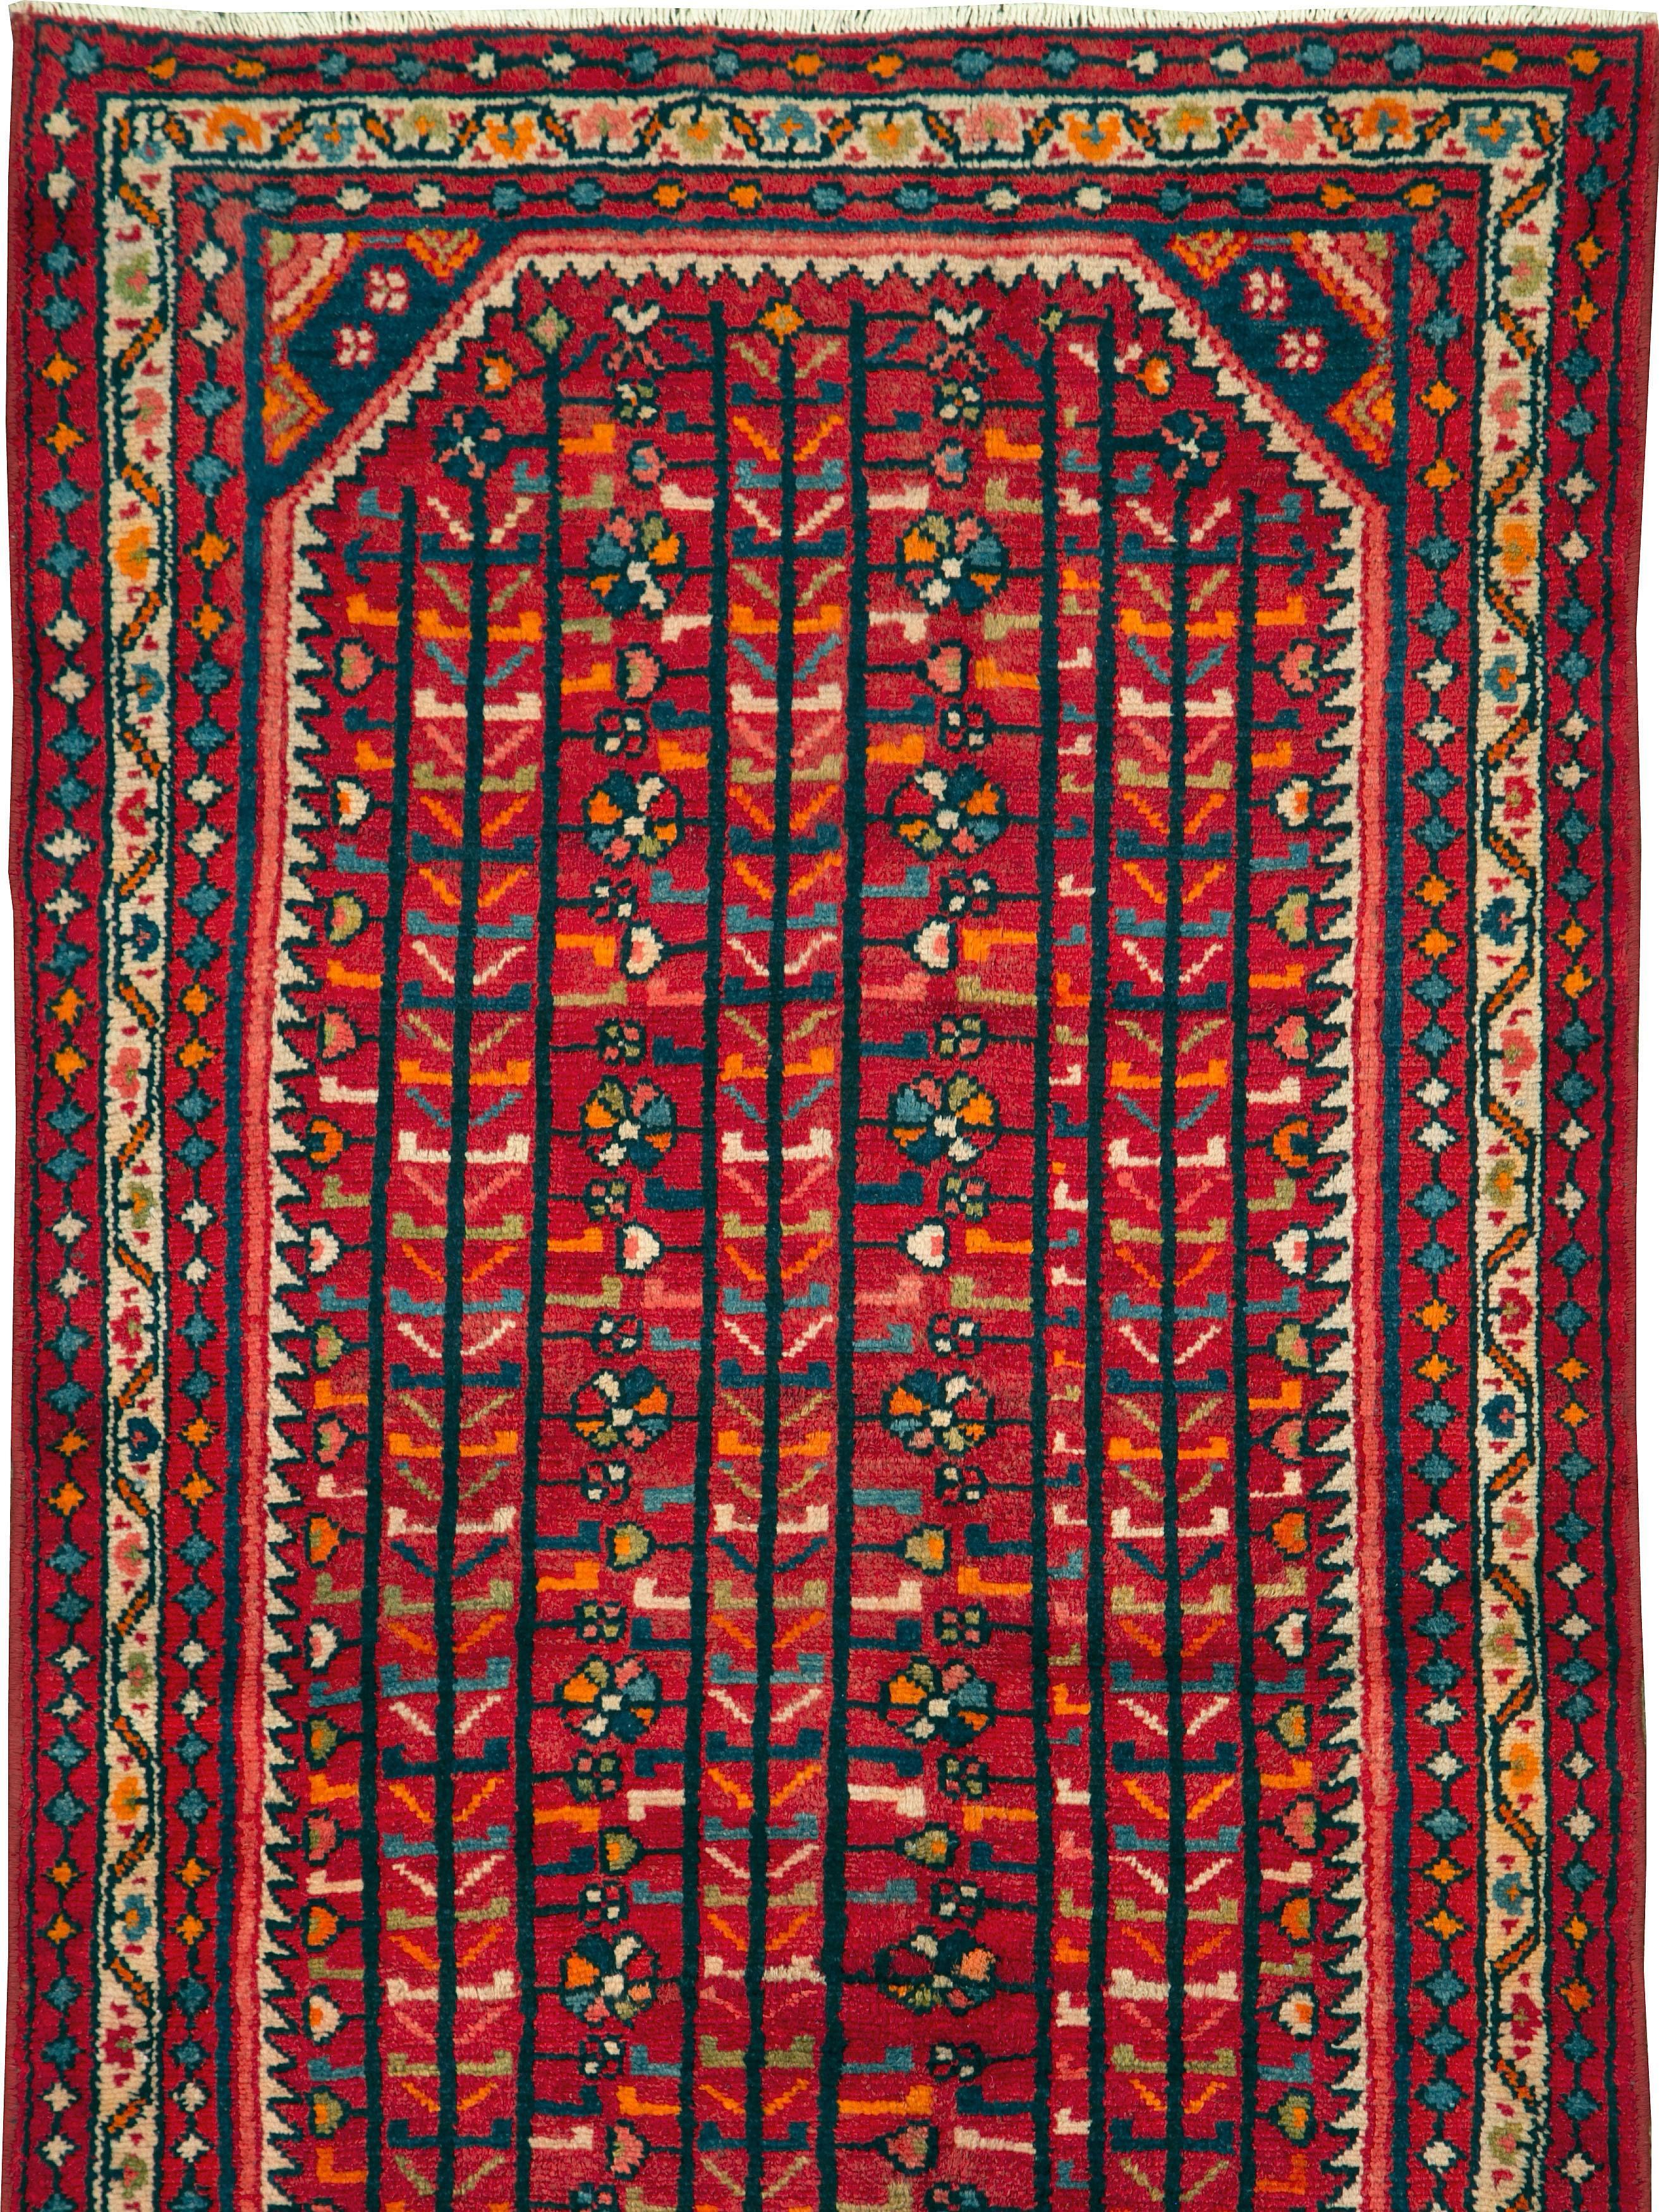 A vintage Persian Malayer rug from the mid-20th century.

Measures: 2' 8